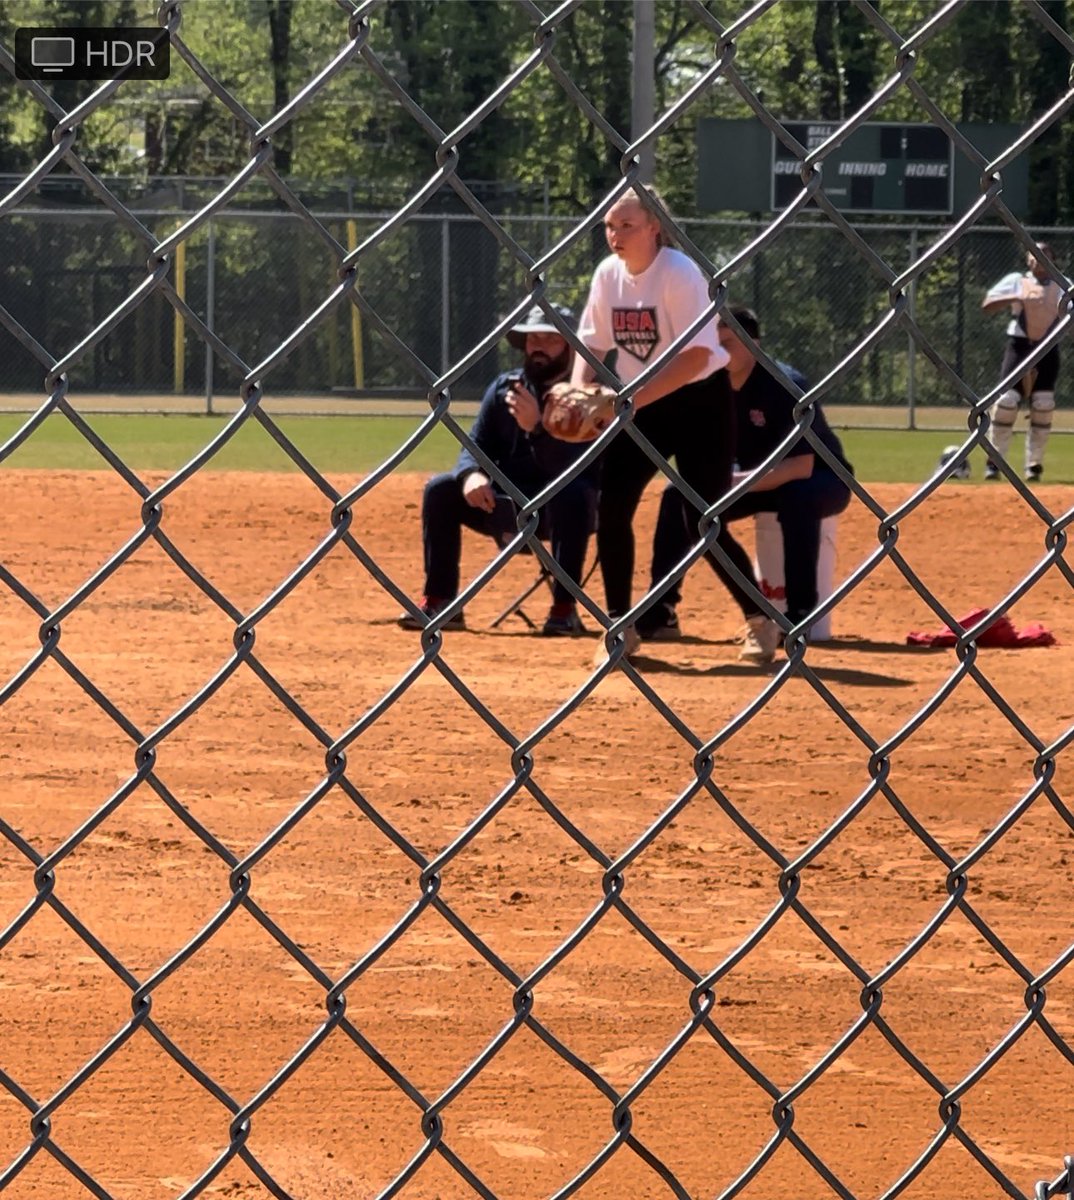 Had a fun softball weekend. Our @LegacySoftball5 team went 3-1 coming up just short in the championship game. I pitched 3 games and had 20Ks. I then traveled to GA for the USA Softball HPP Region 3 tryouts. What a great experience!